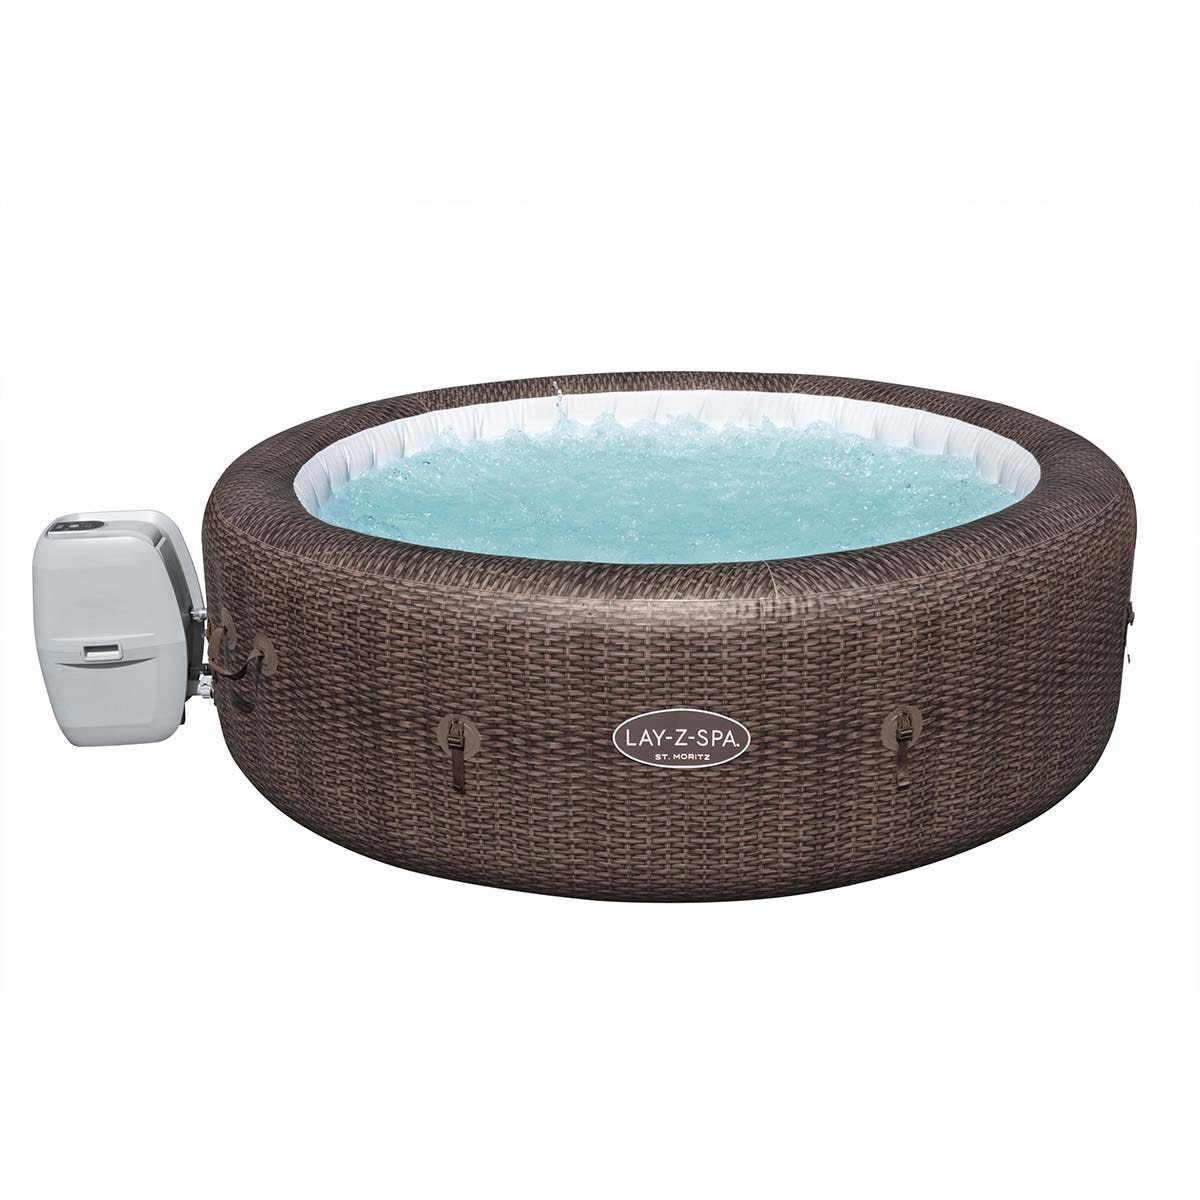 Lay-Z-Spa St Moritz AirJet Hot Tub Inflatable Spa, 5-7 Persons